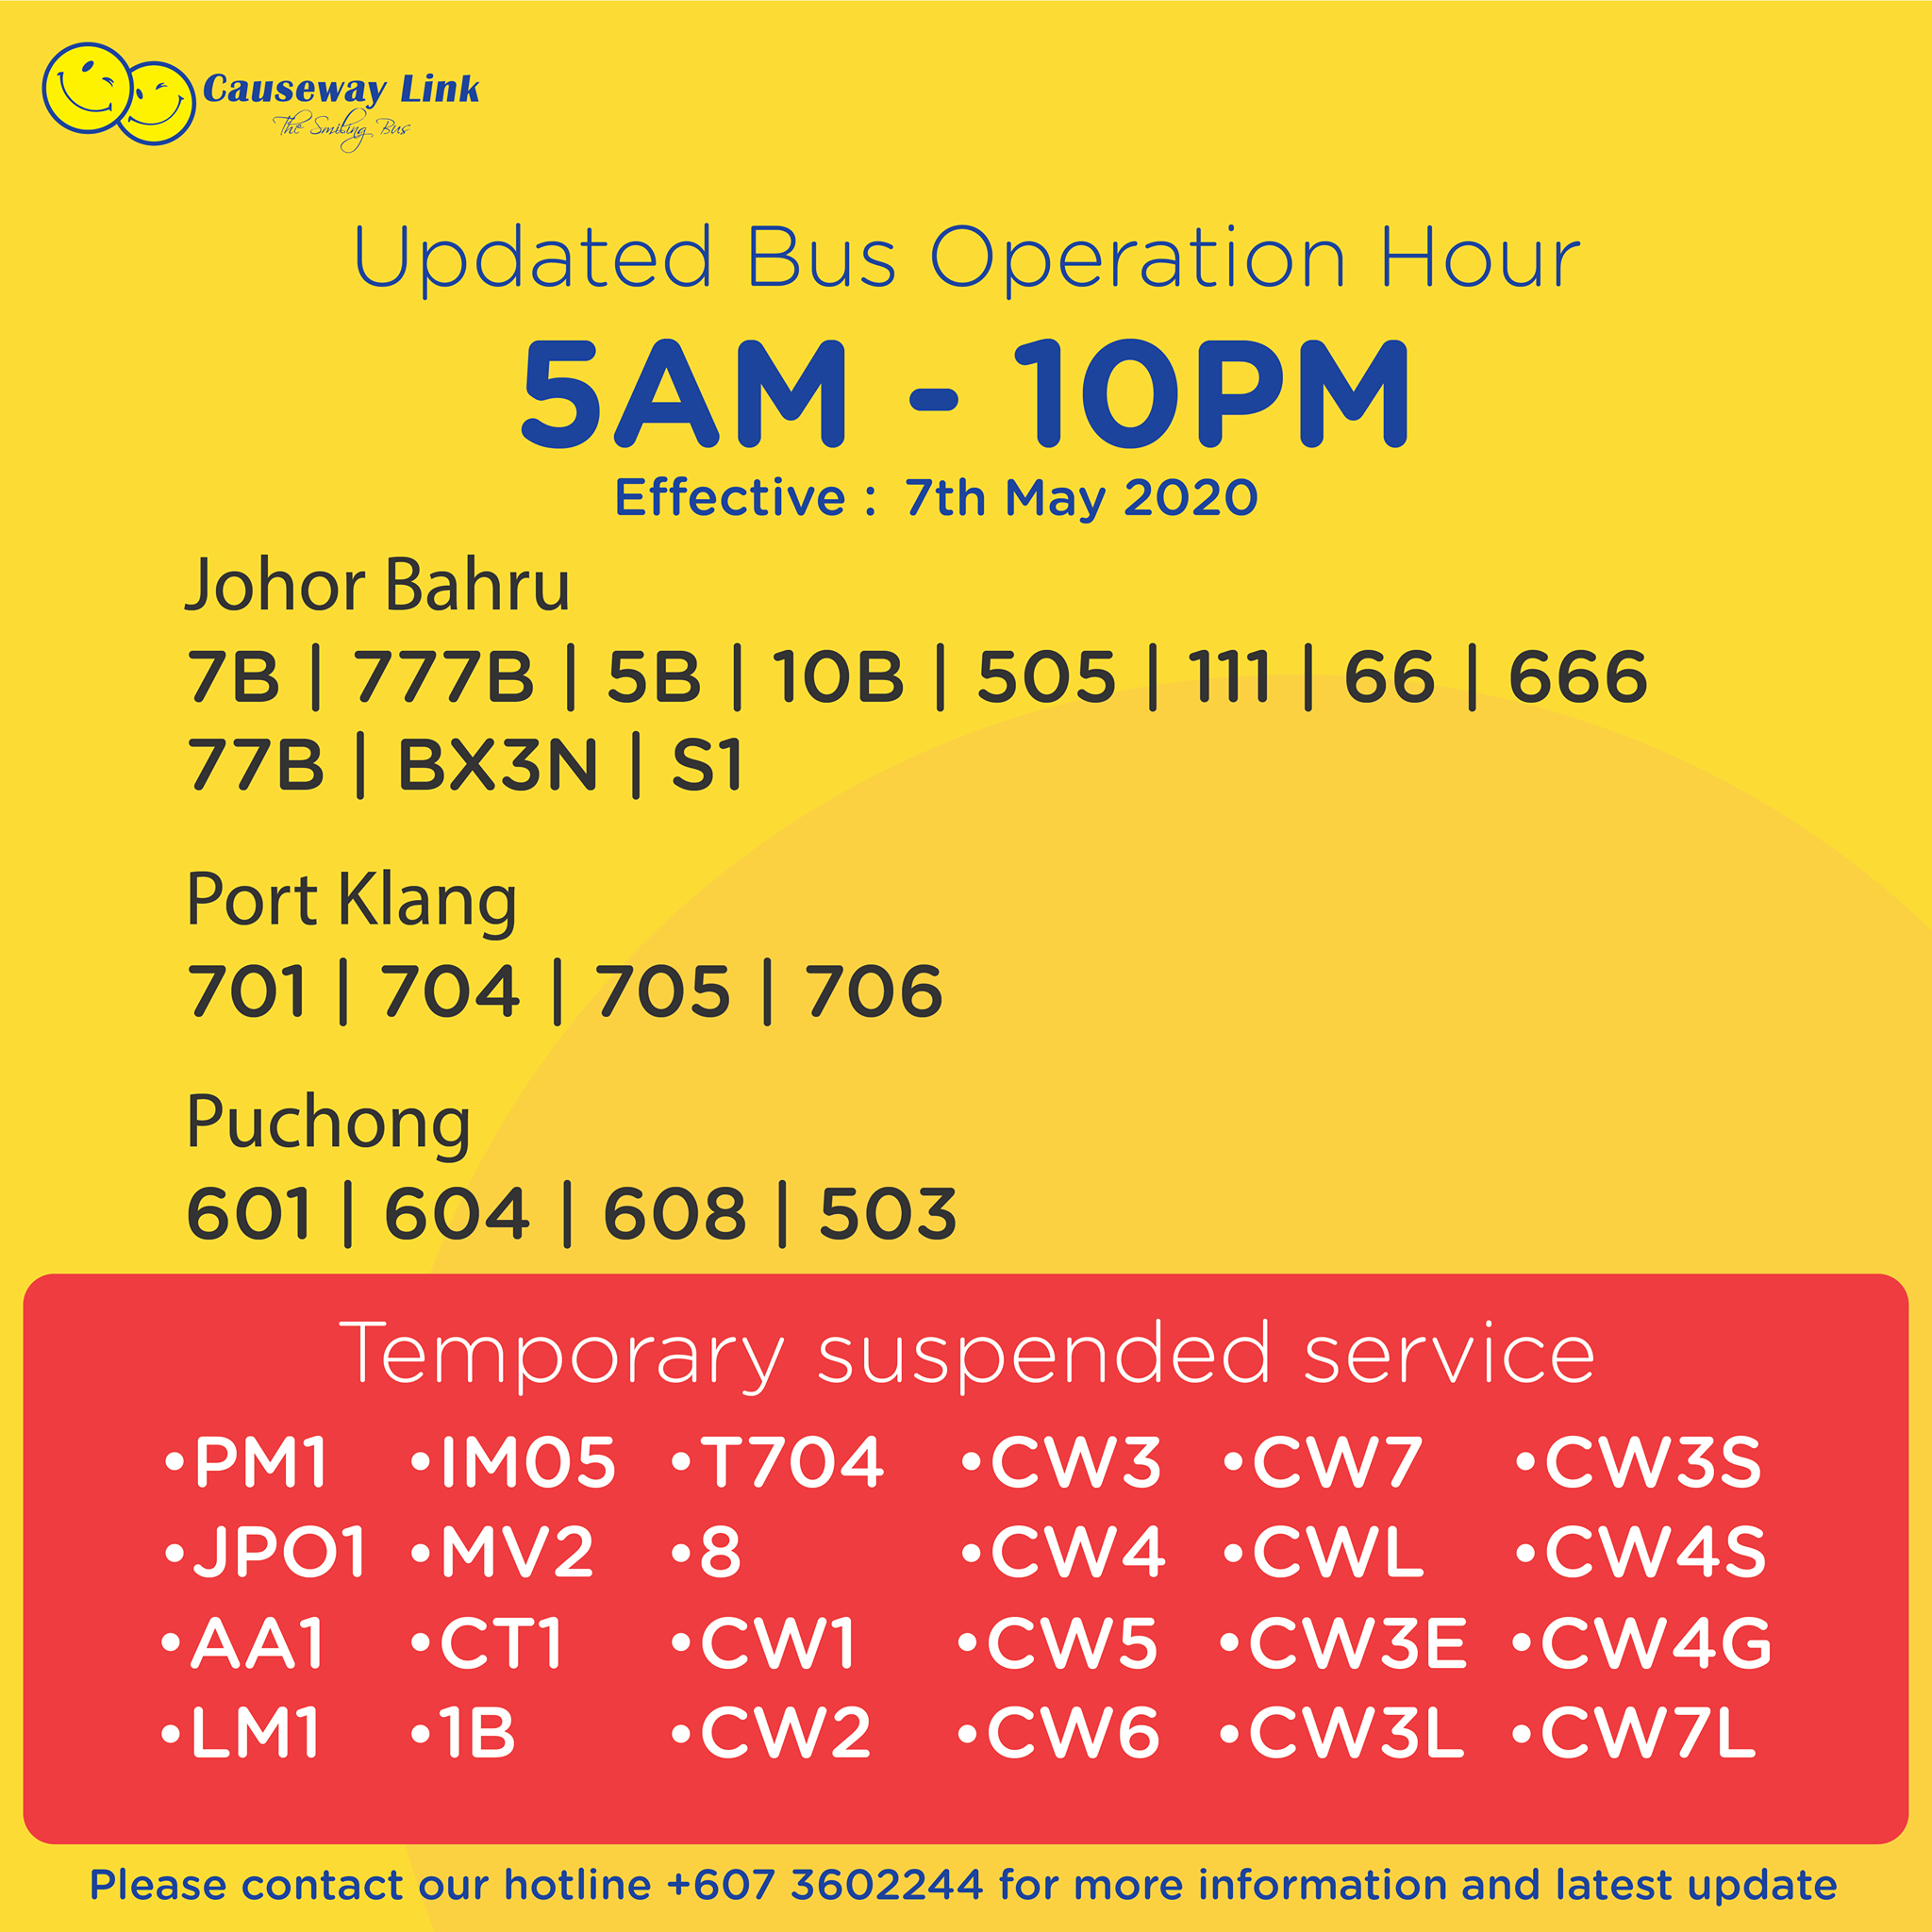 Operating status of Causeway Link bus services from 7 May 2020